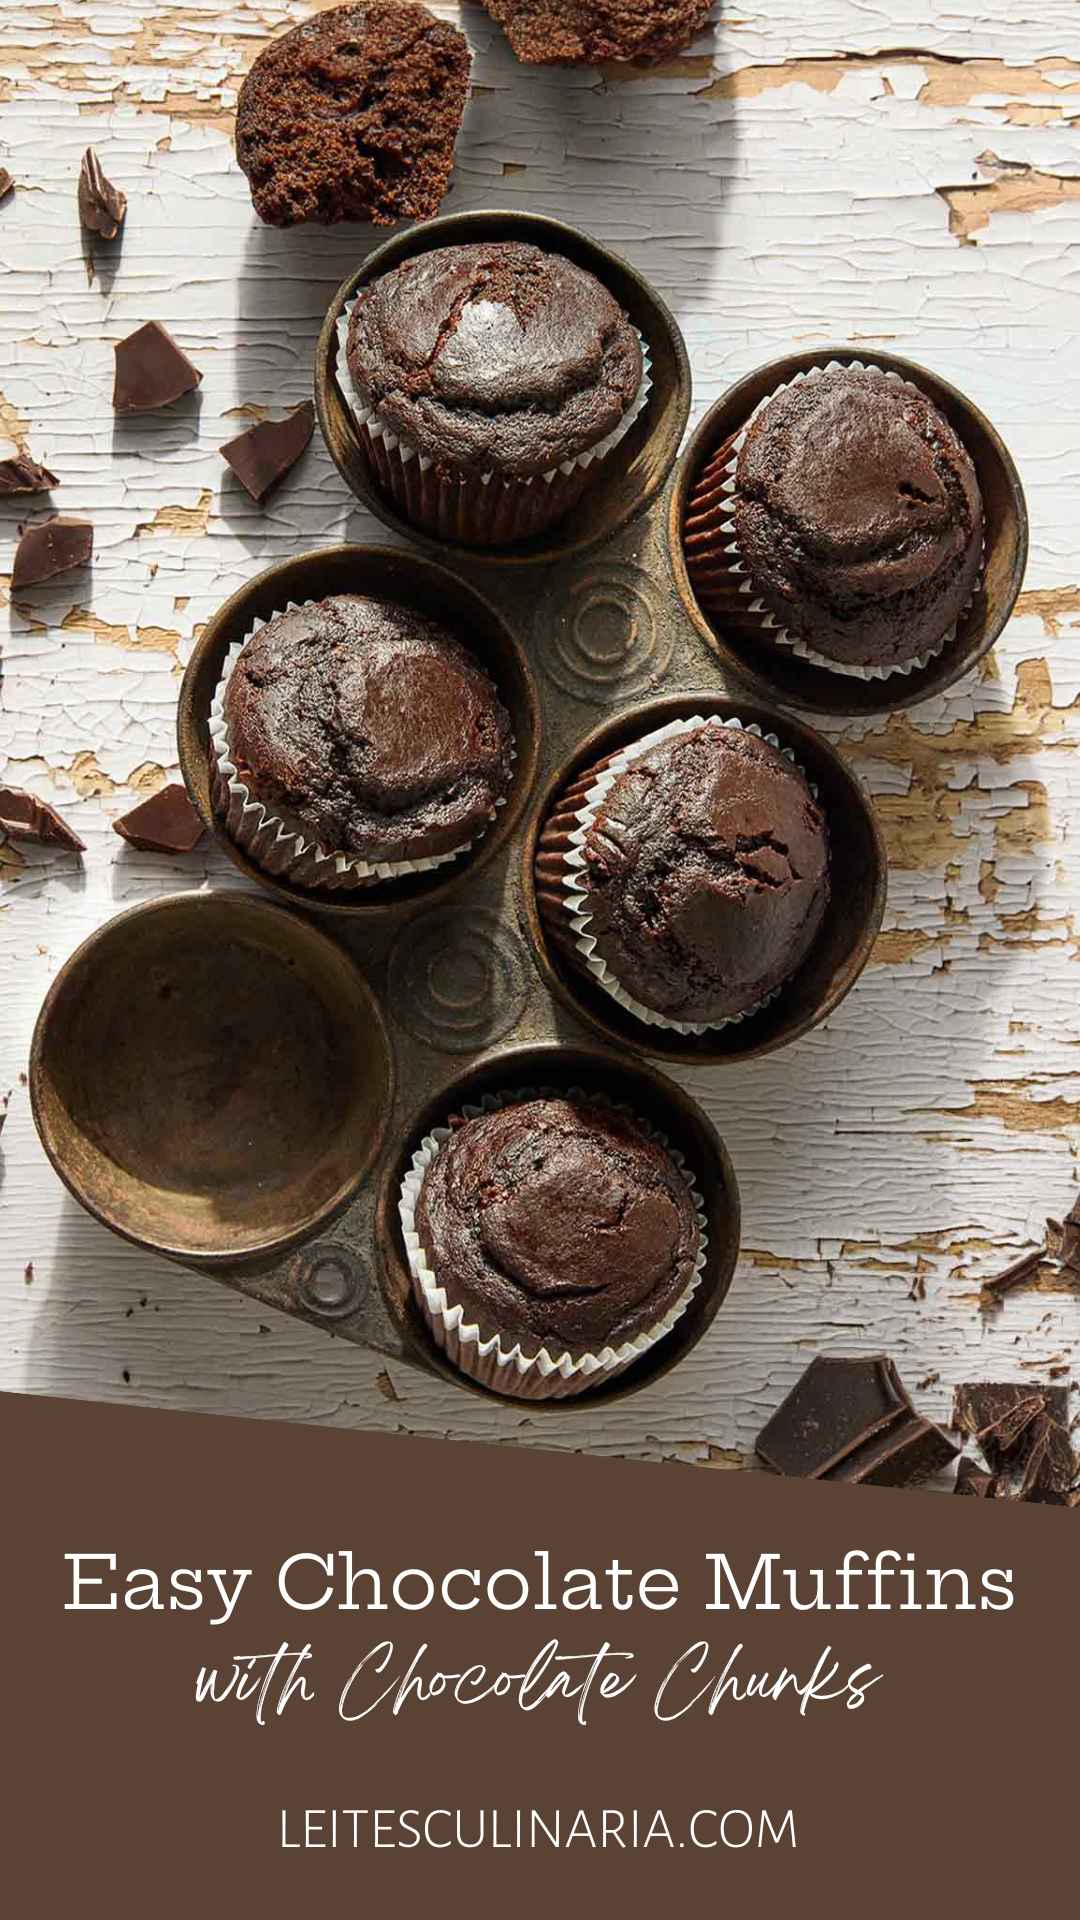 Five chocolate muffins in an antique muffin tin.